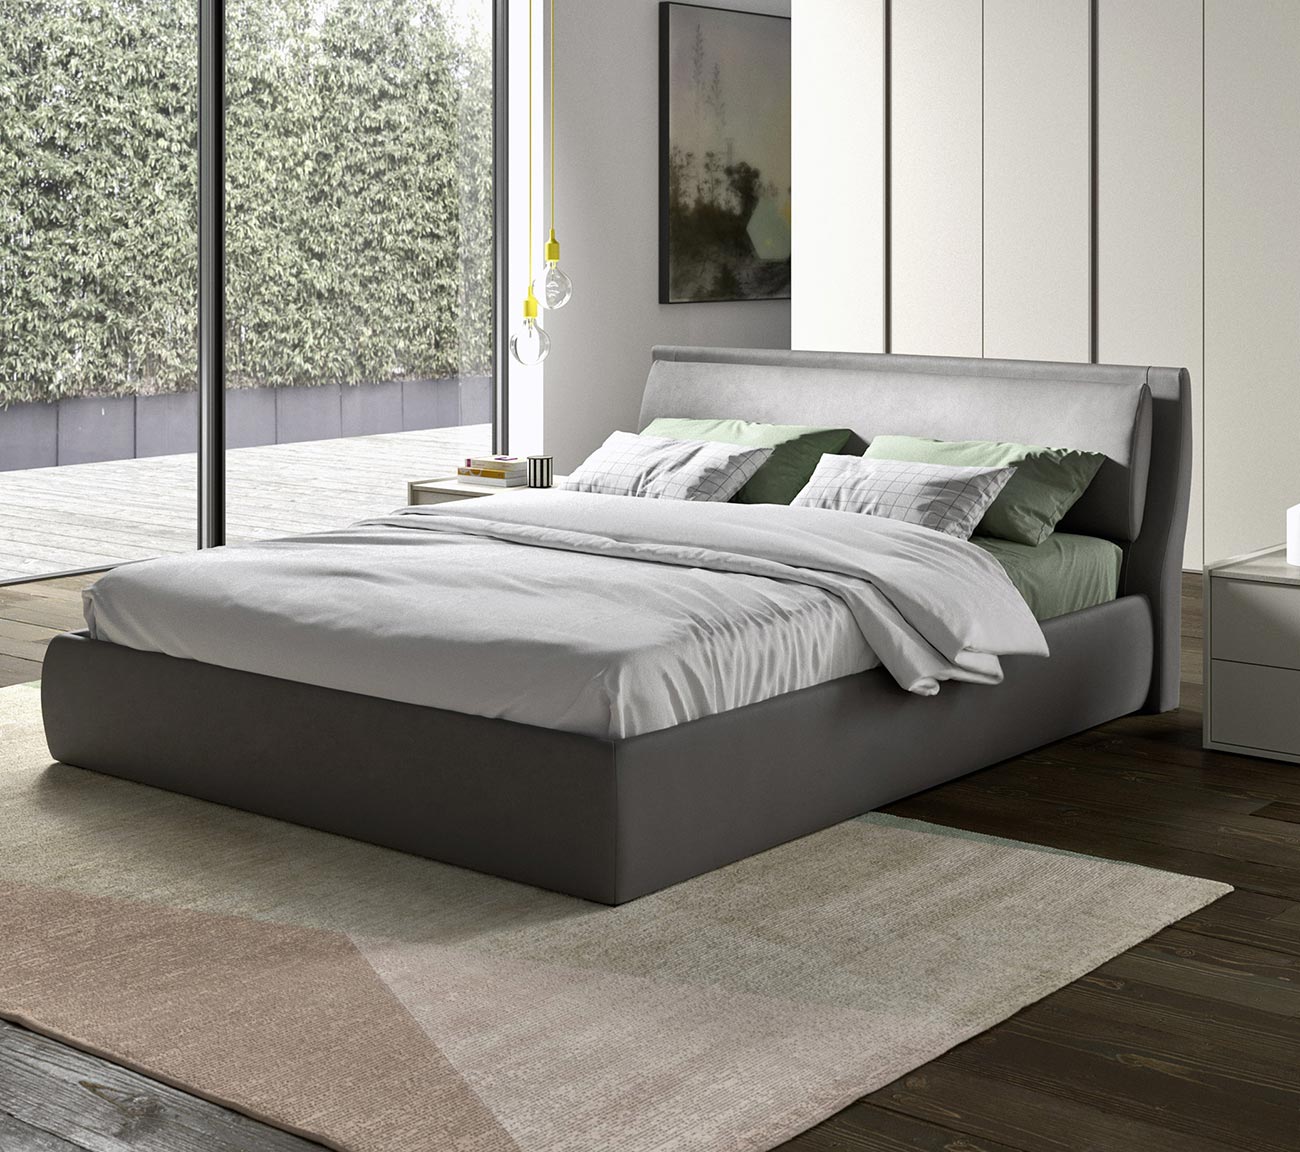 Modern double bed for mid-room positioning